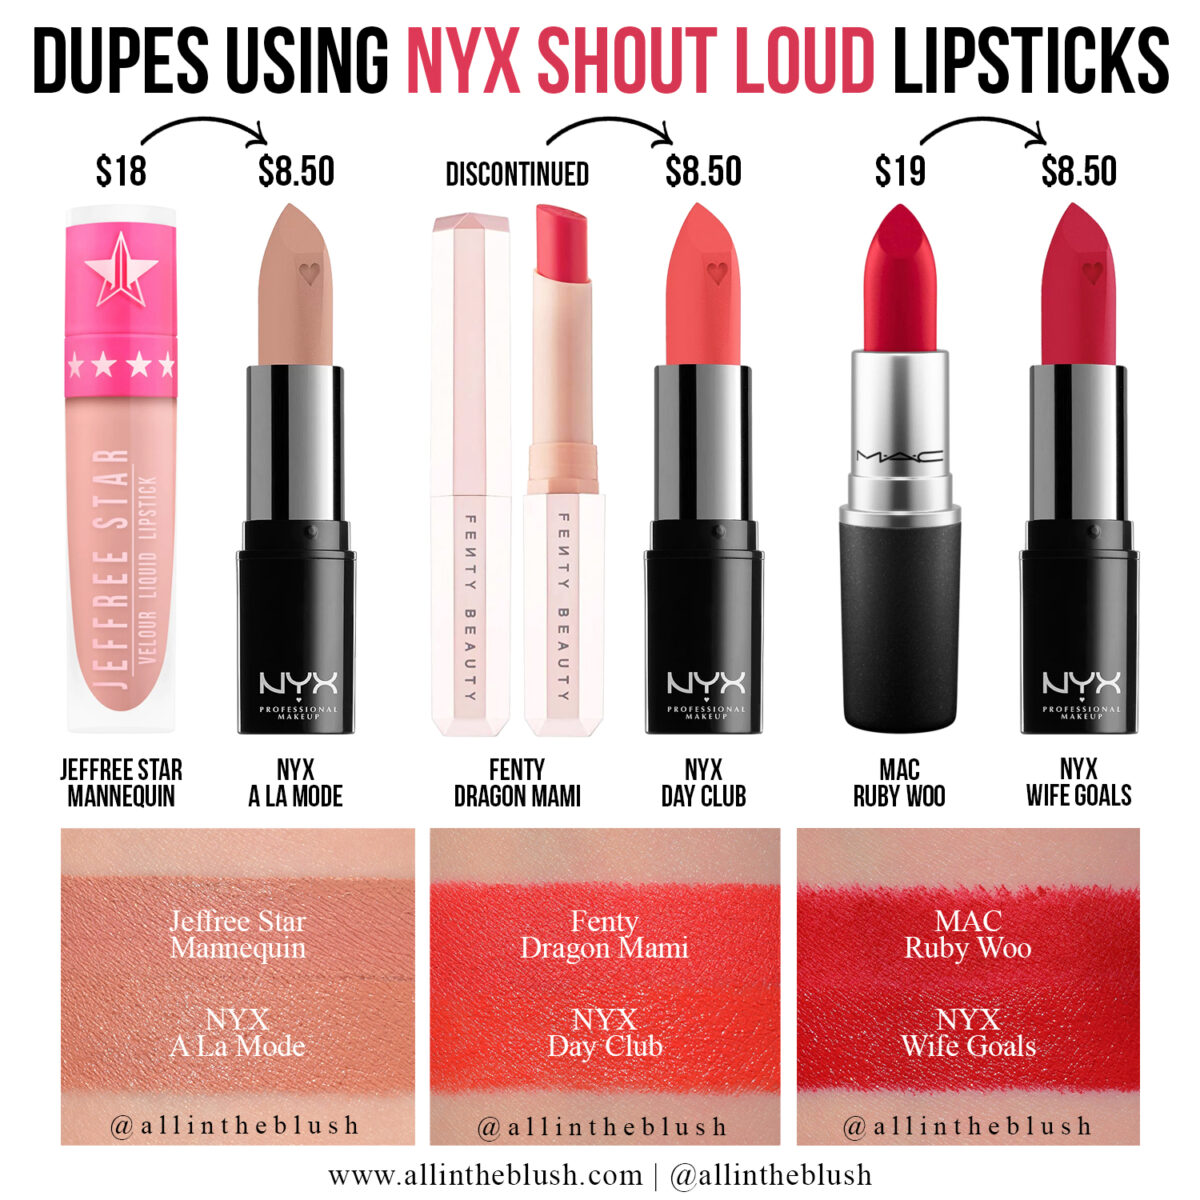 Dupes using the NYX Shout Loud Lipsticks